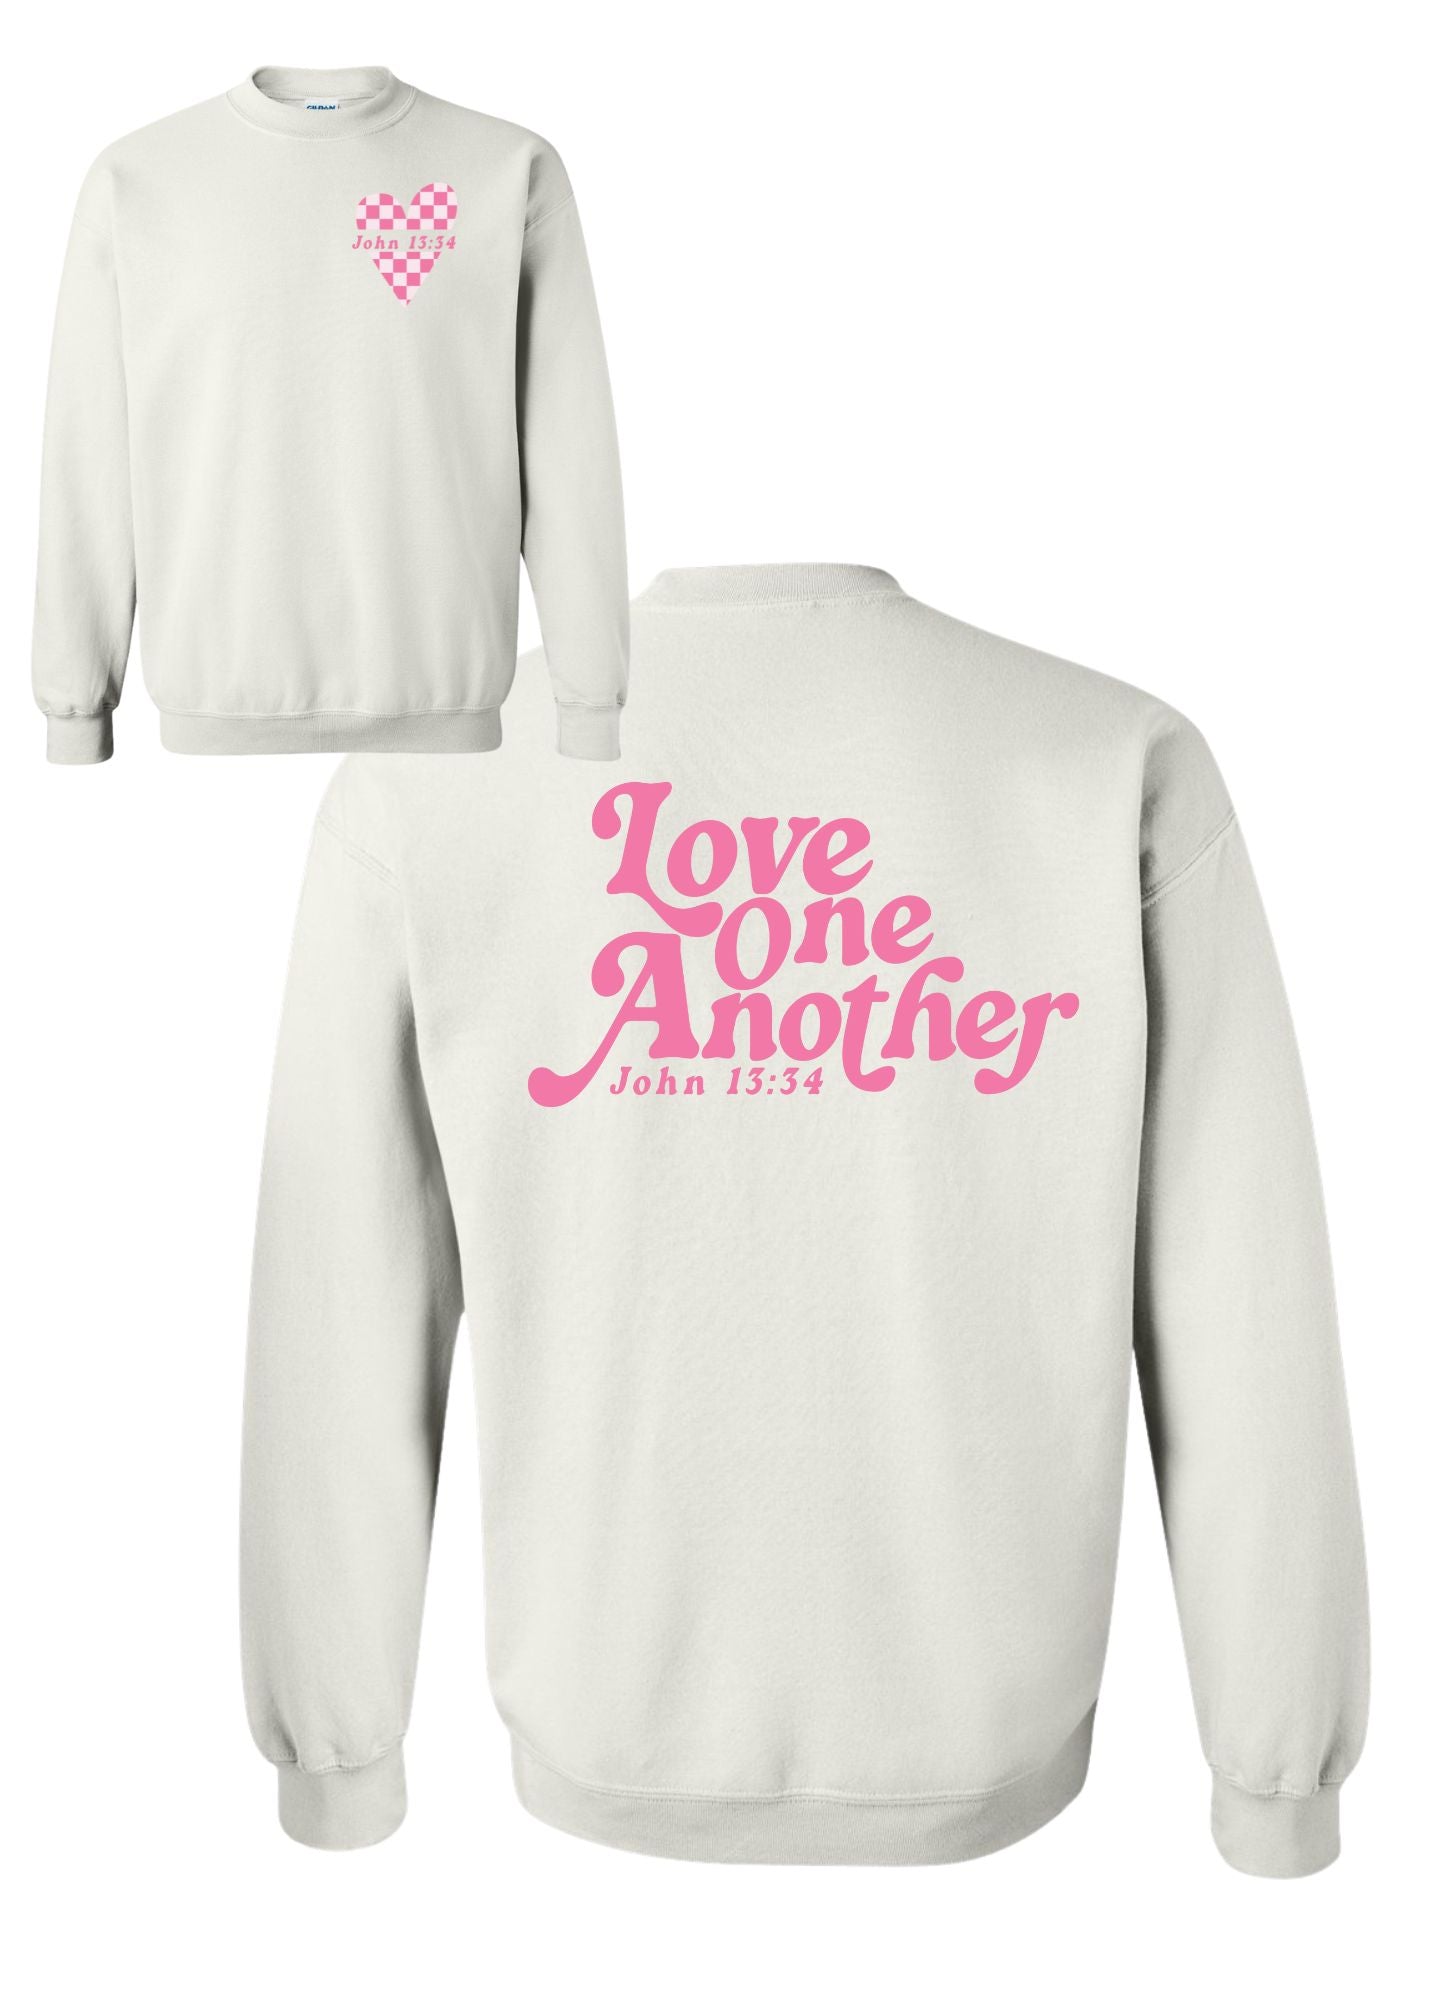 Love One Another | Pullover | Adult-Sister Shirts-Sister Shirts, Cute & Custom Tees for Mama & Littles in Trussville, Alabama.